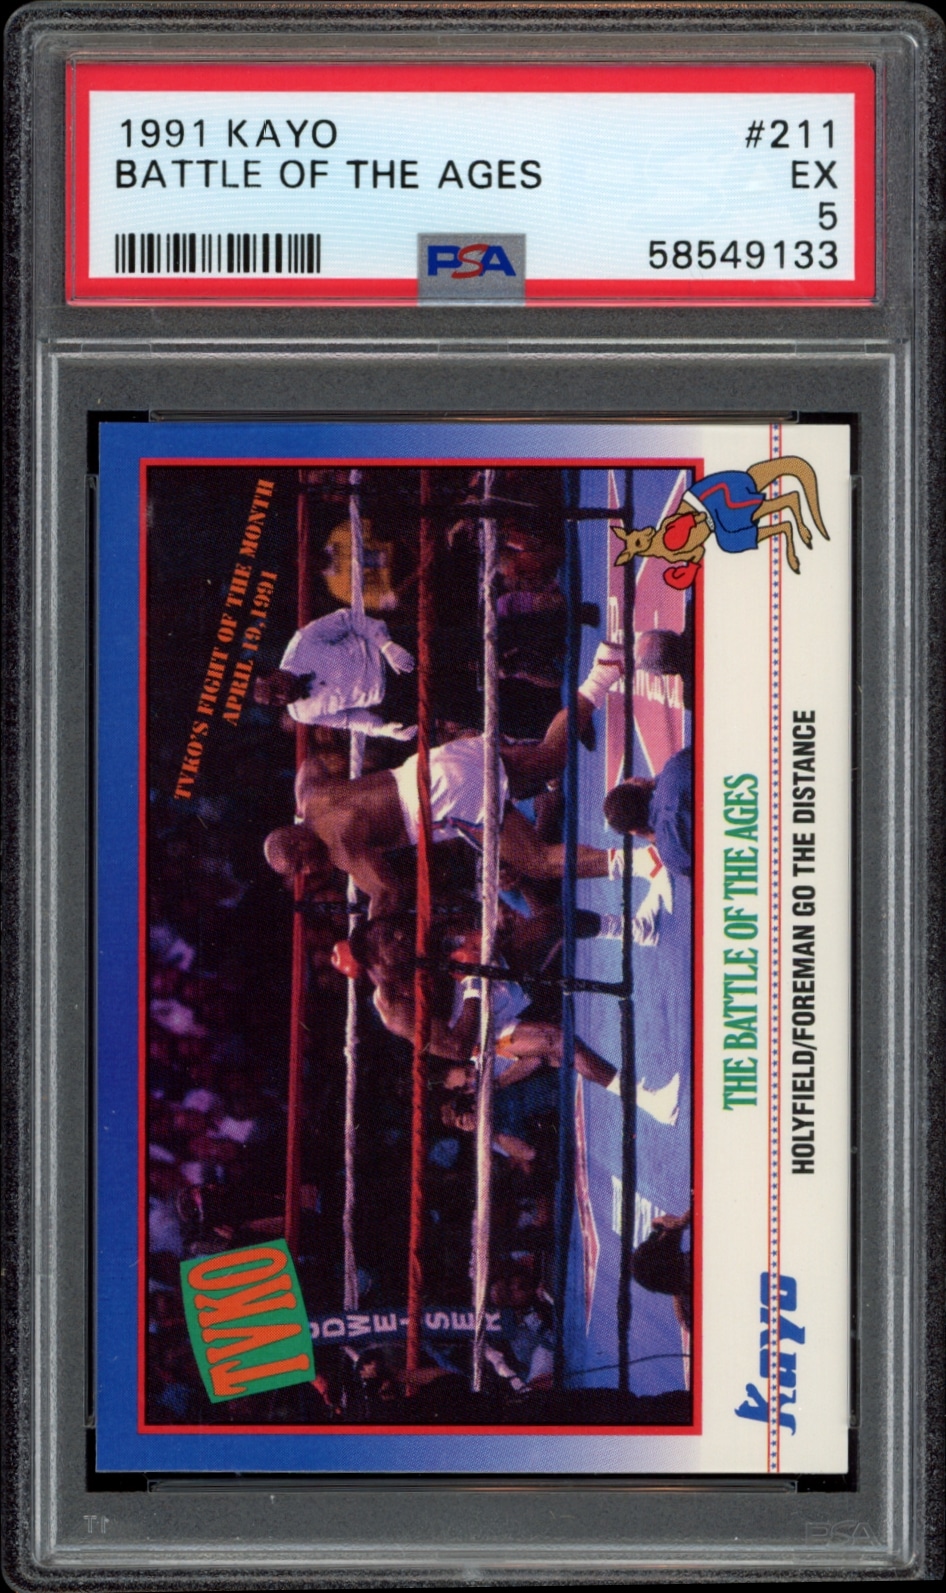 1991 KAYO boxing card featuring Evander Holyfield vs George Foreman, graded PSA 5.